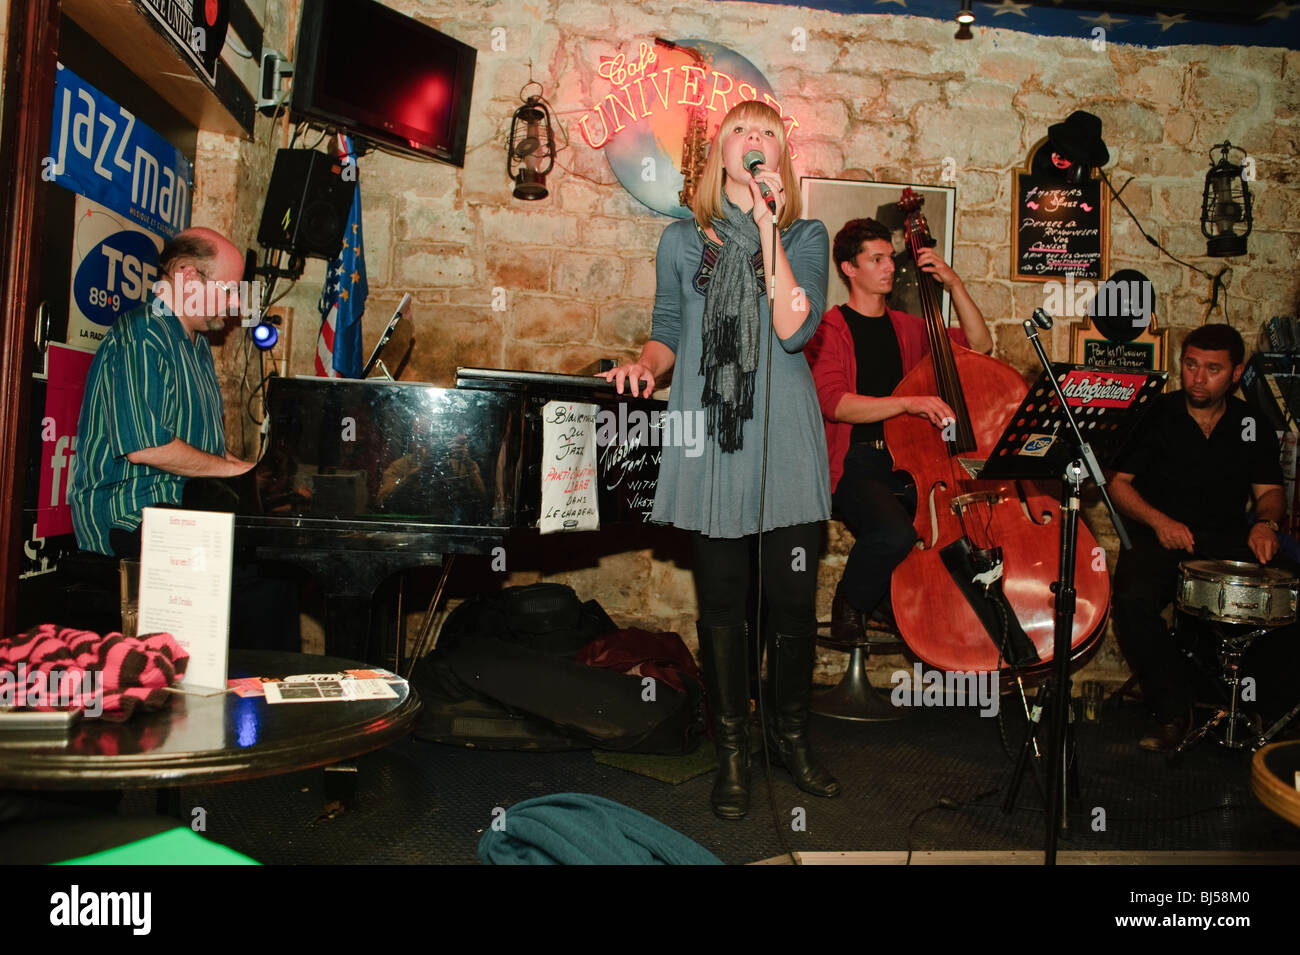 Paris, France, 'Cafe Universe' Jazz Music Club, American Female Singer Performing on Stage with Band Stock Photo